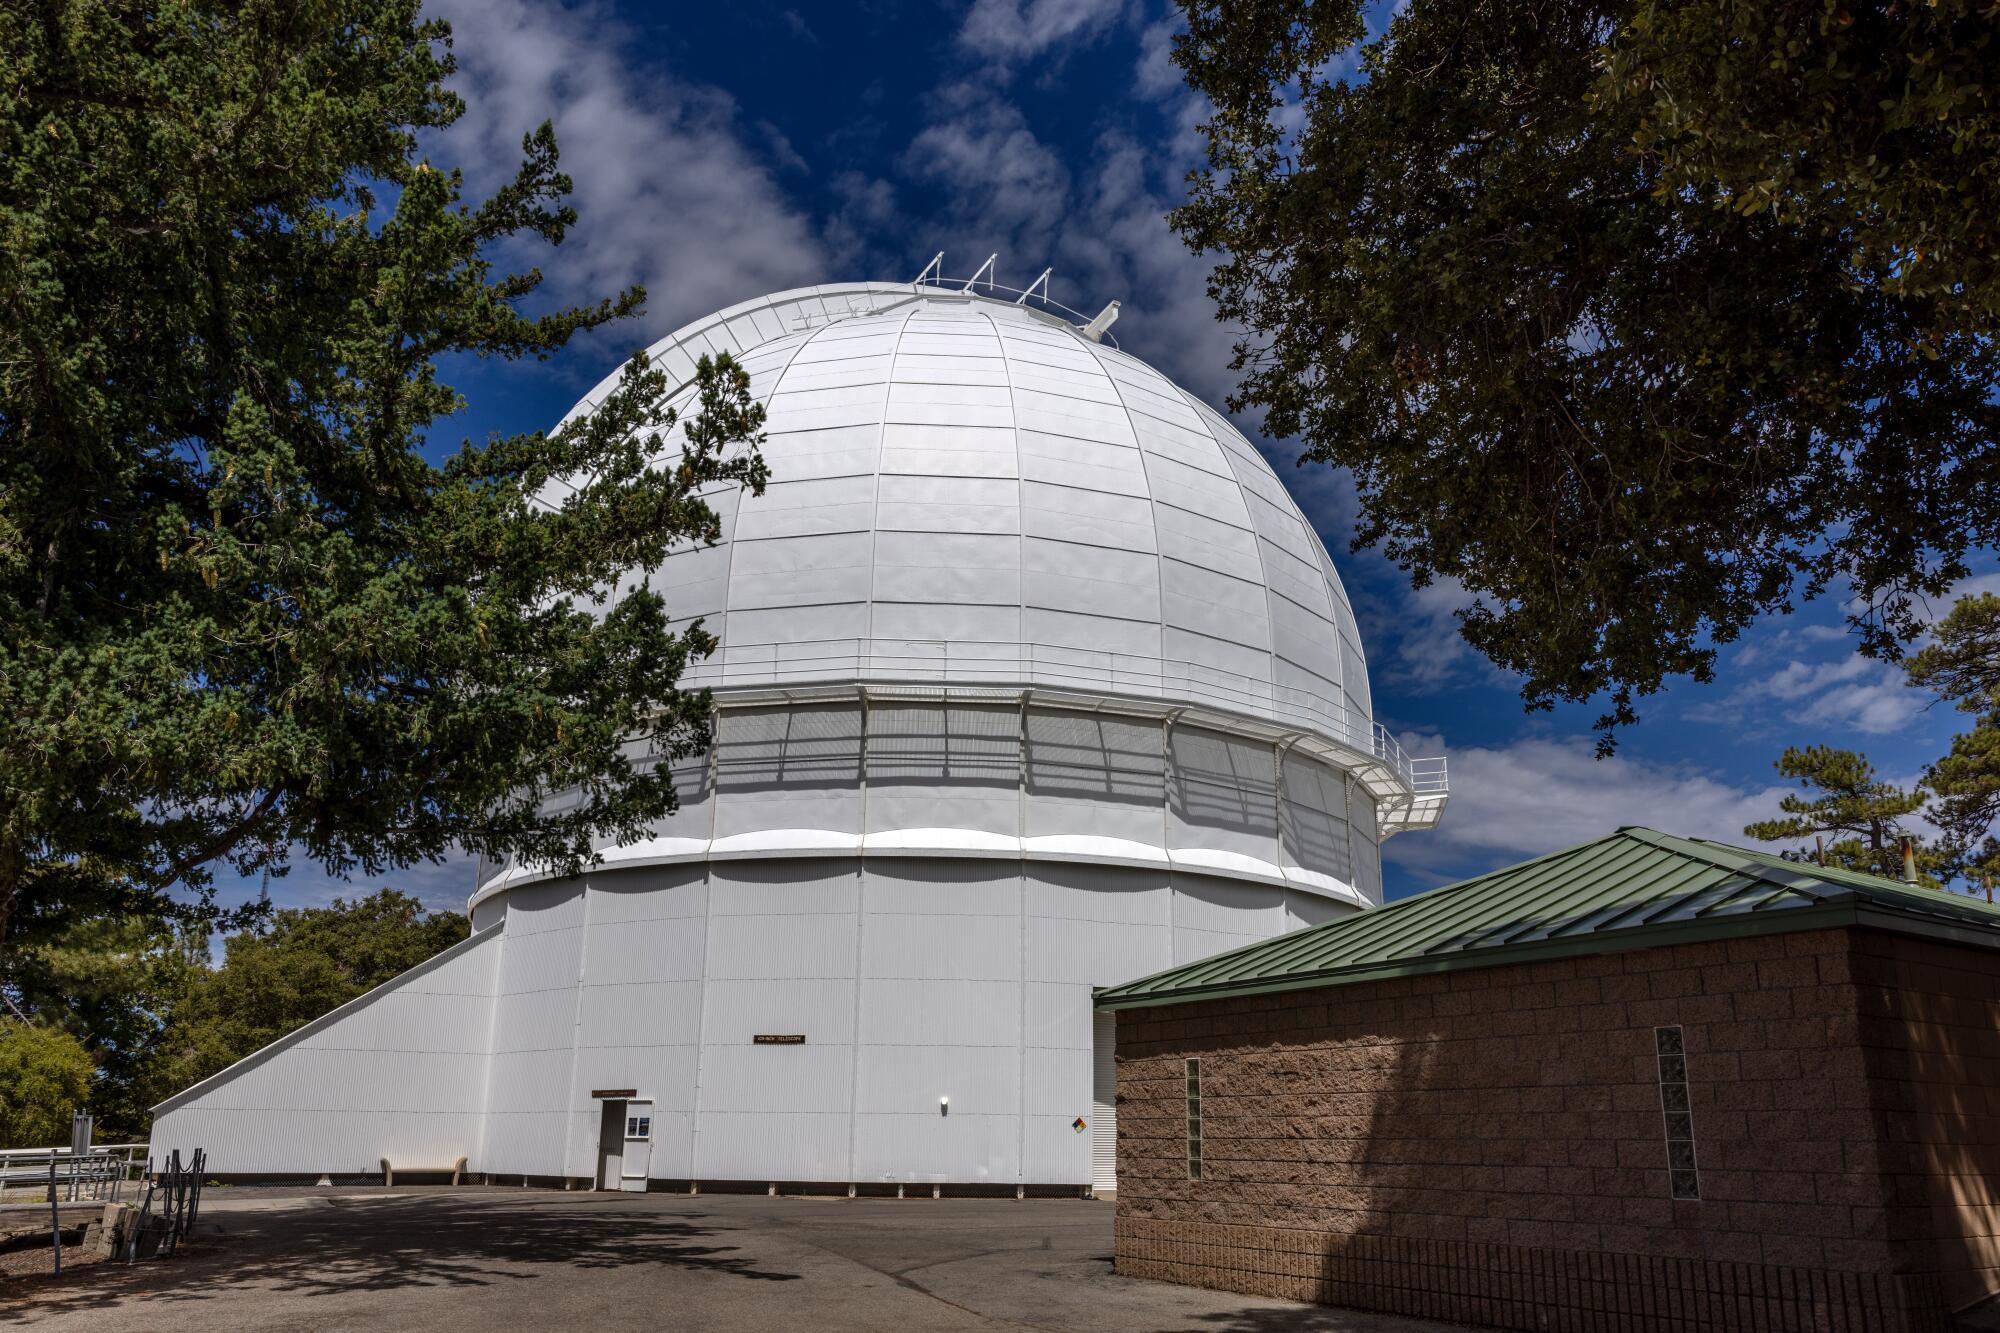 Massive dome of 100-inch (2.5 m) Hooker telescope at Mount Wilson Observatory located on Mount Wilson.